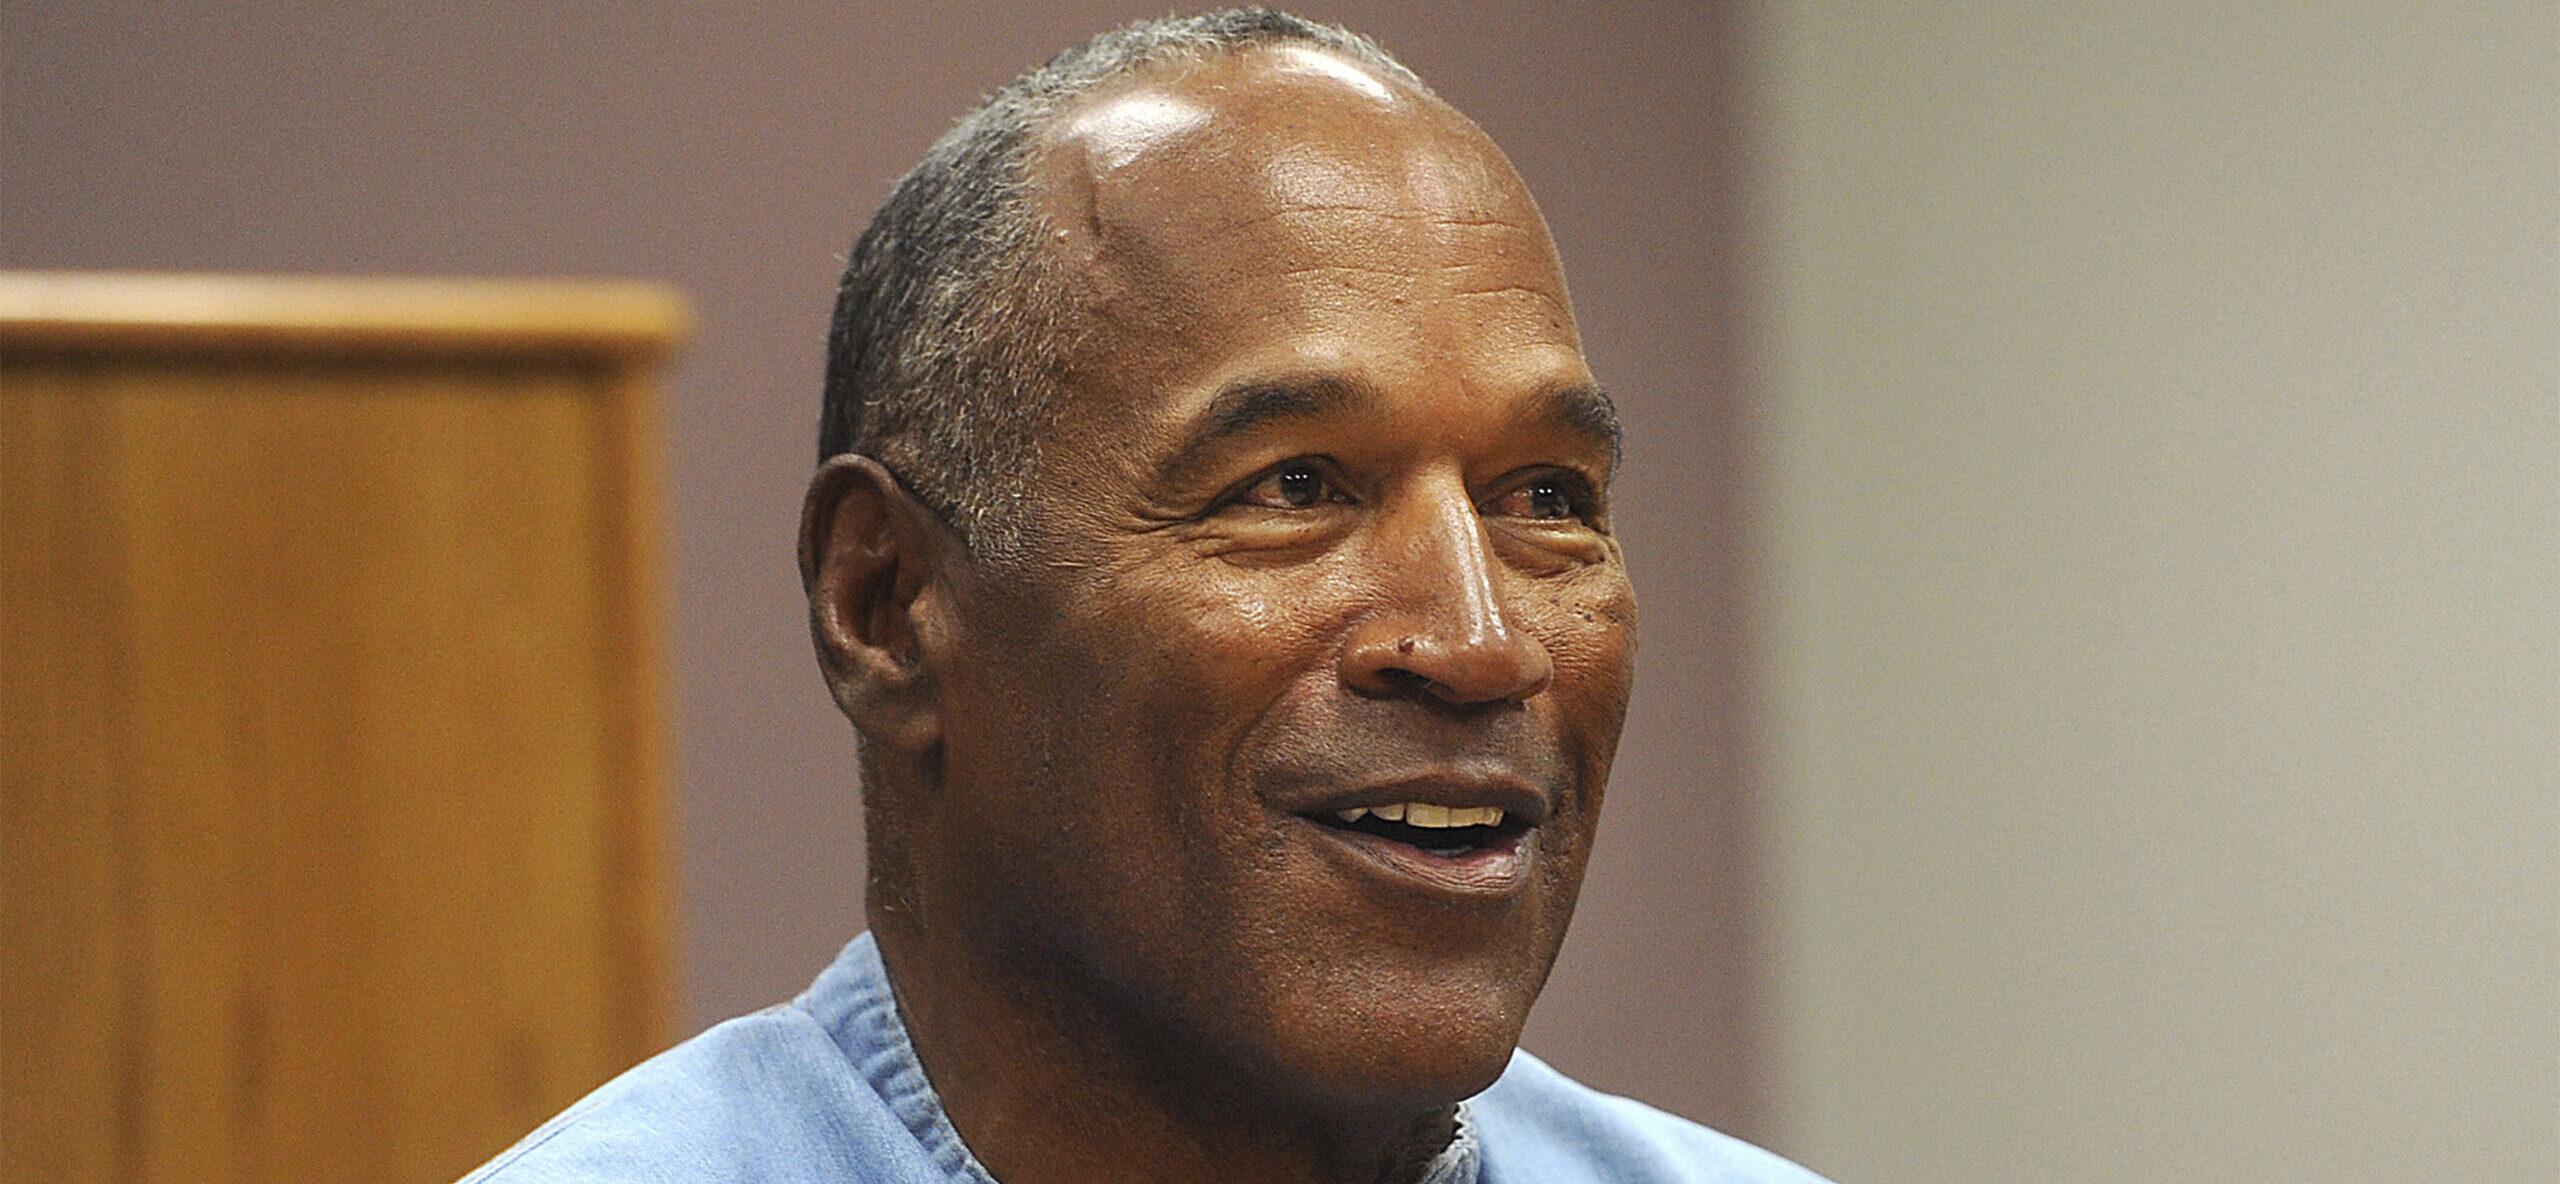 Former Football Star OJ Simpson Diagnosed With Cancer